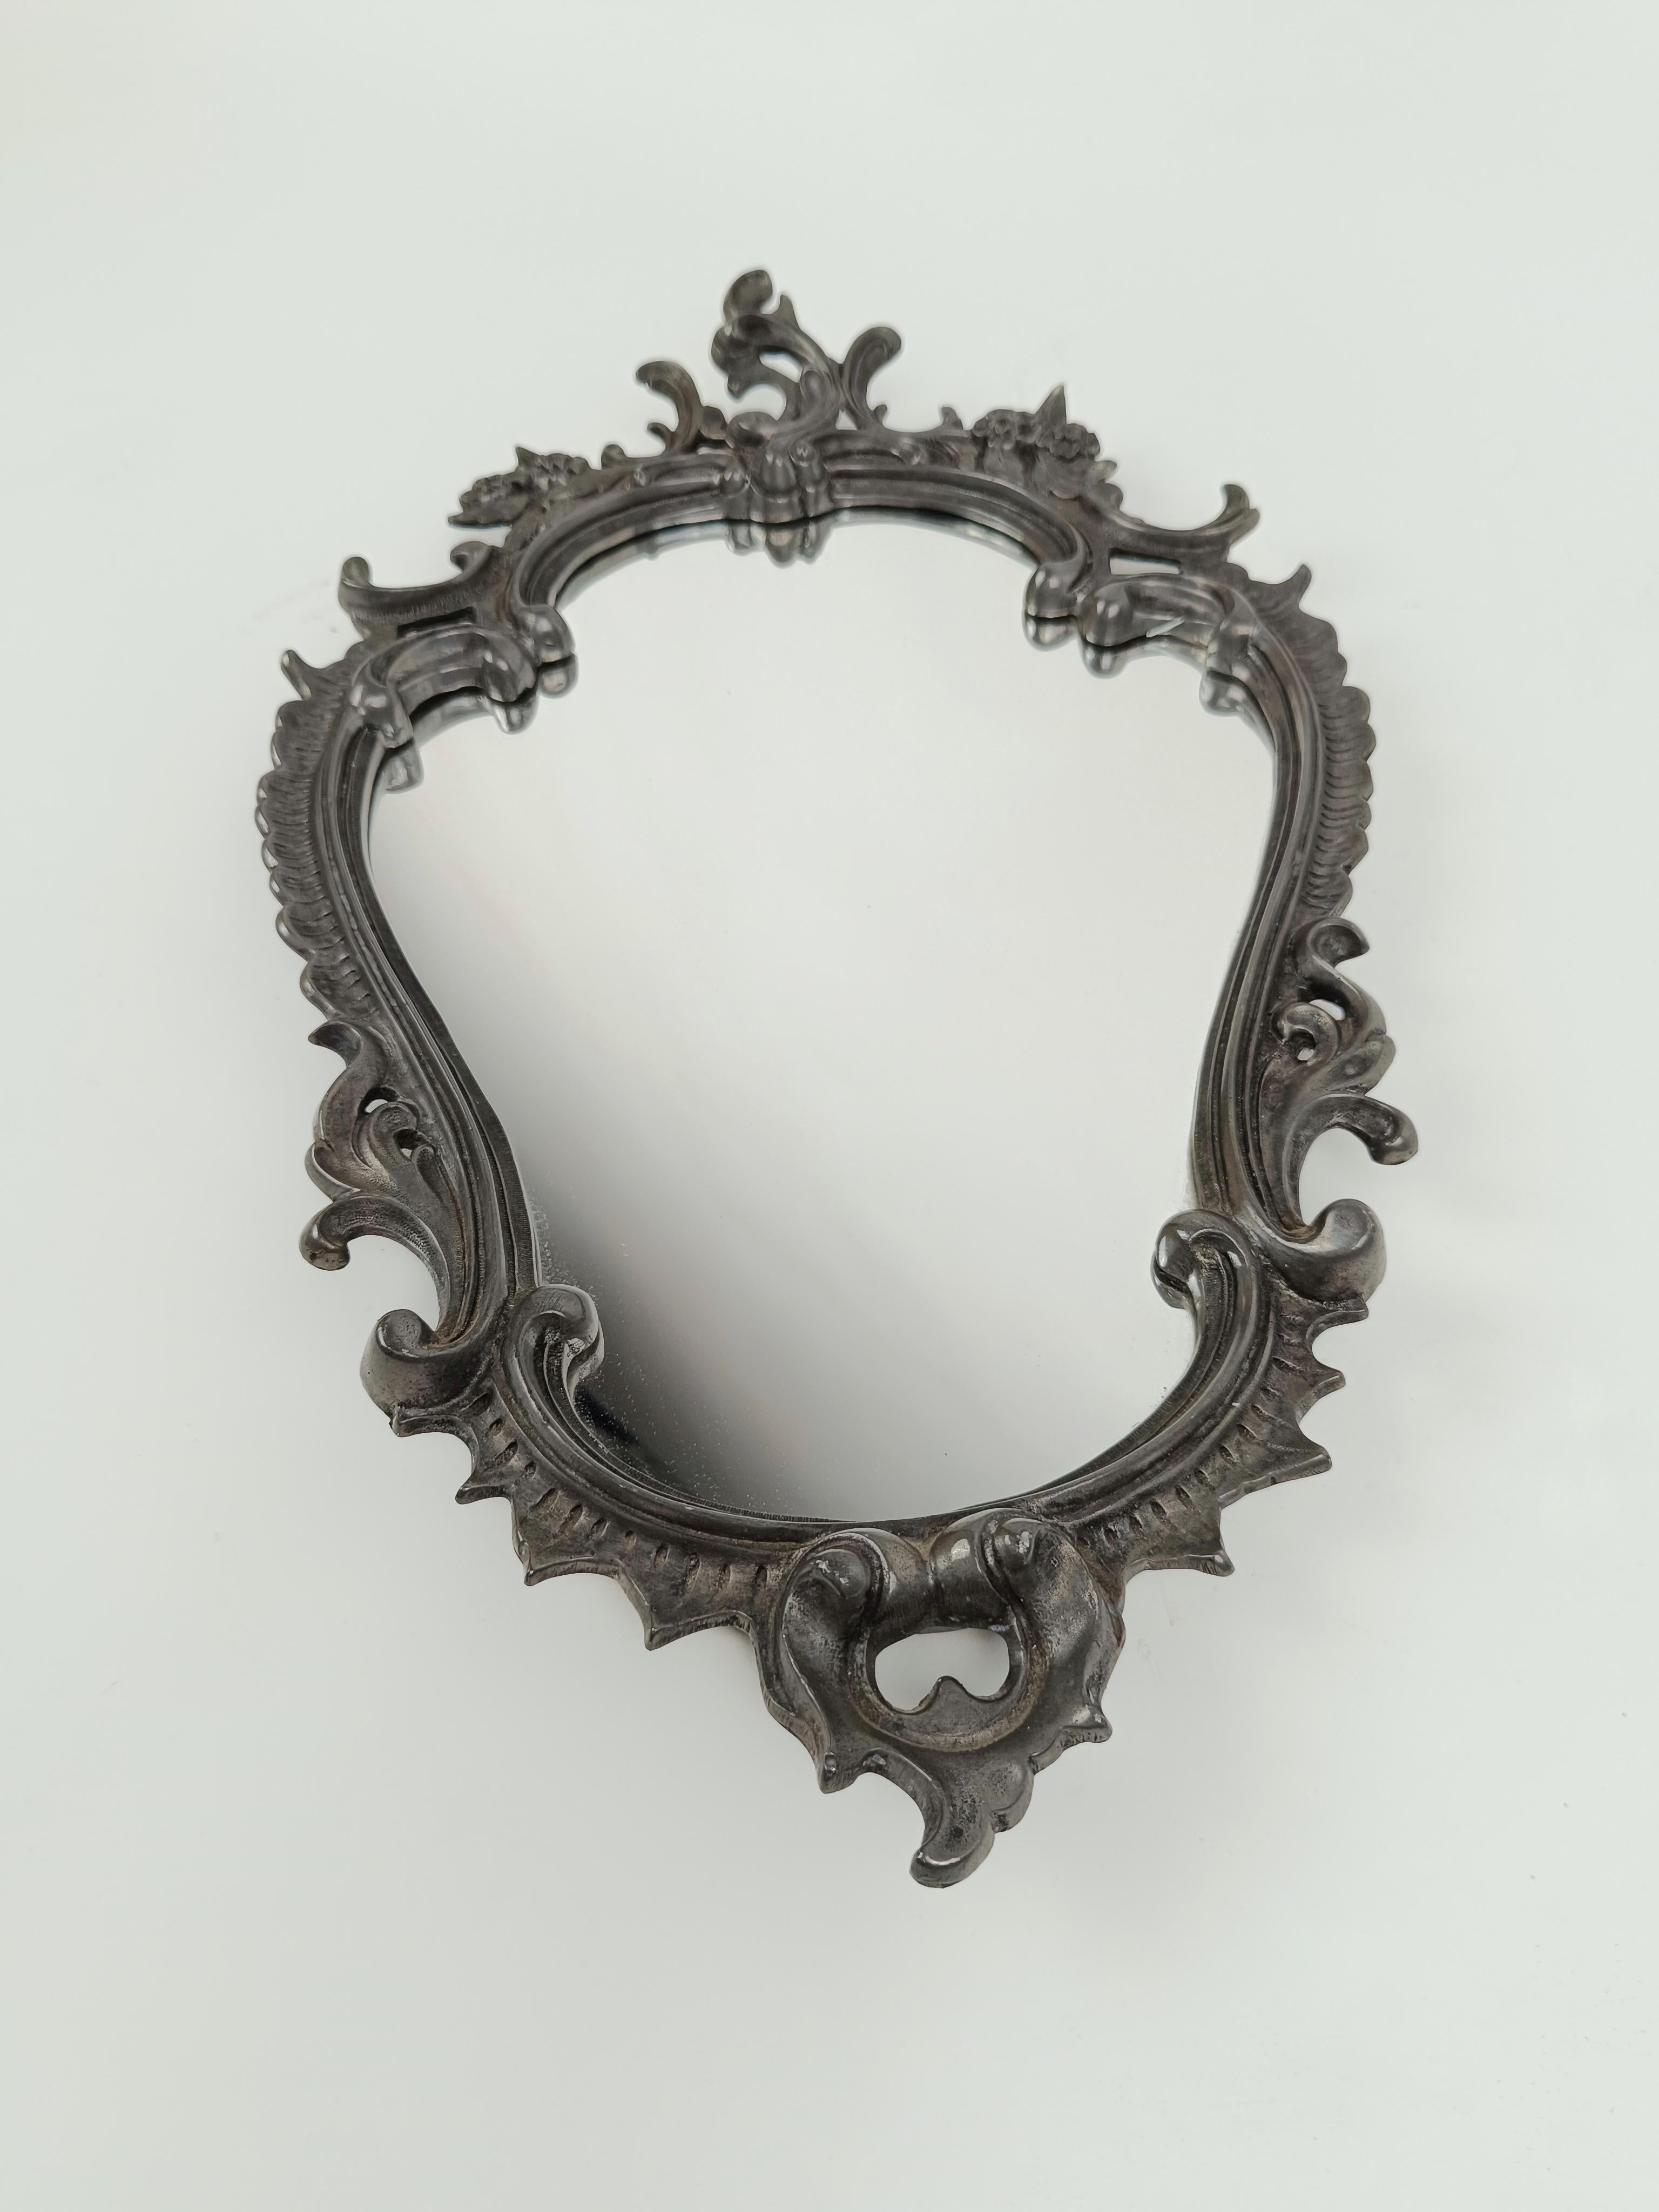 Vintage Mirror in Baroque Rococo style made in german silver For Sale 1